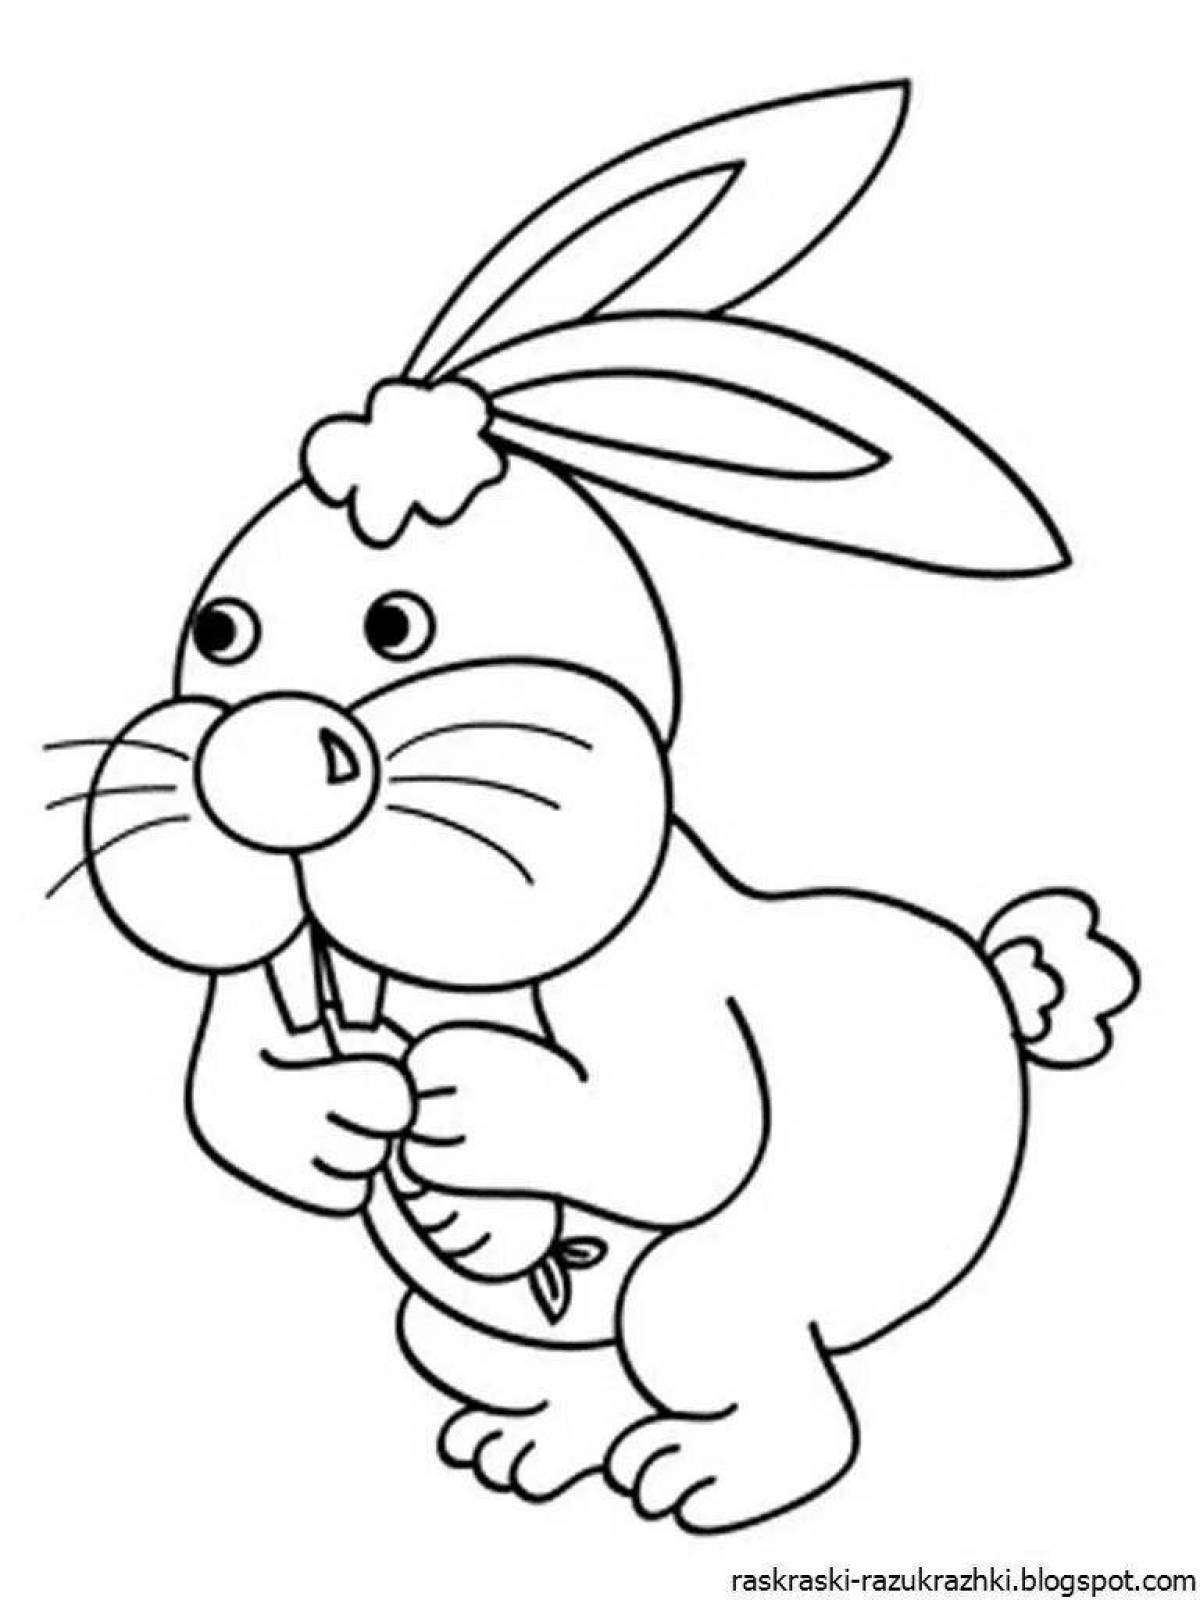 Lovely coloring picture of a hare for kids